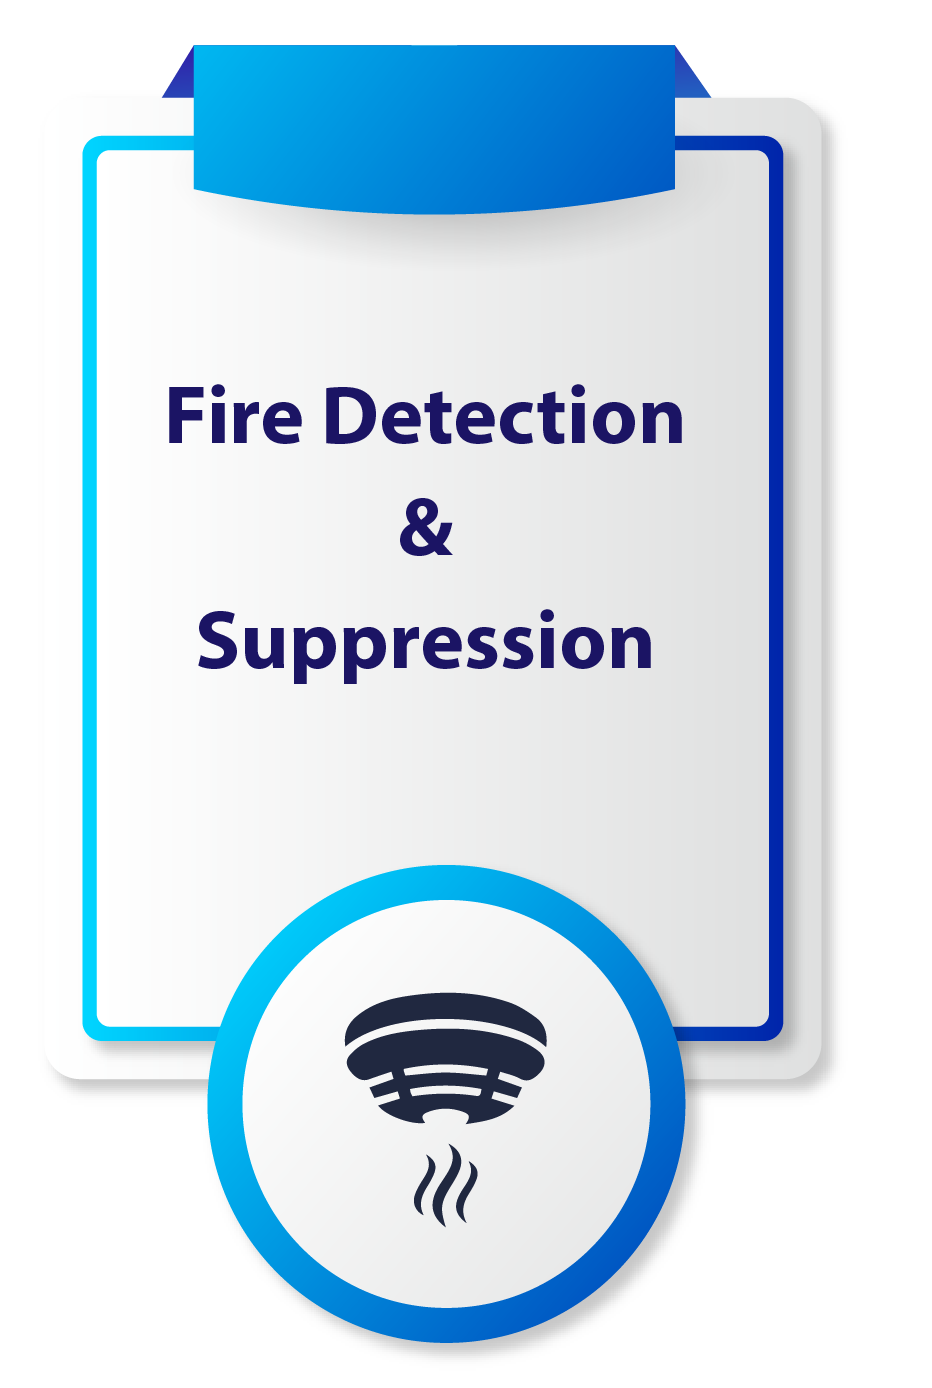 Fire detection